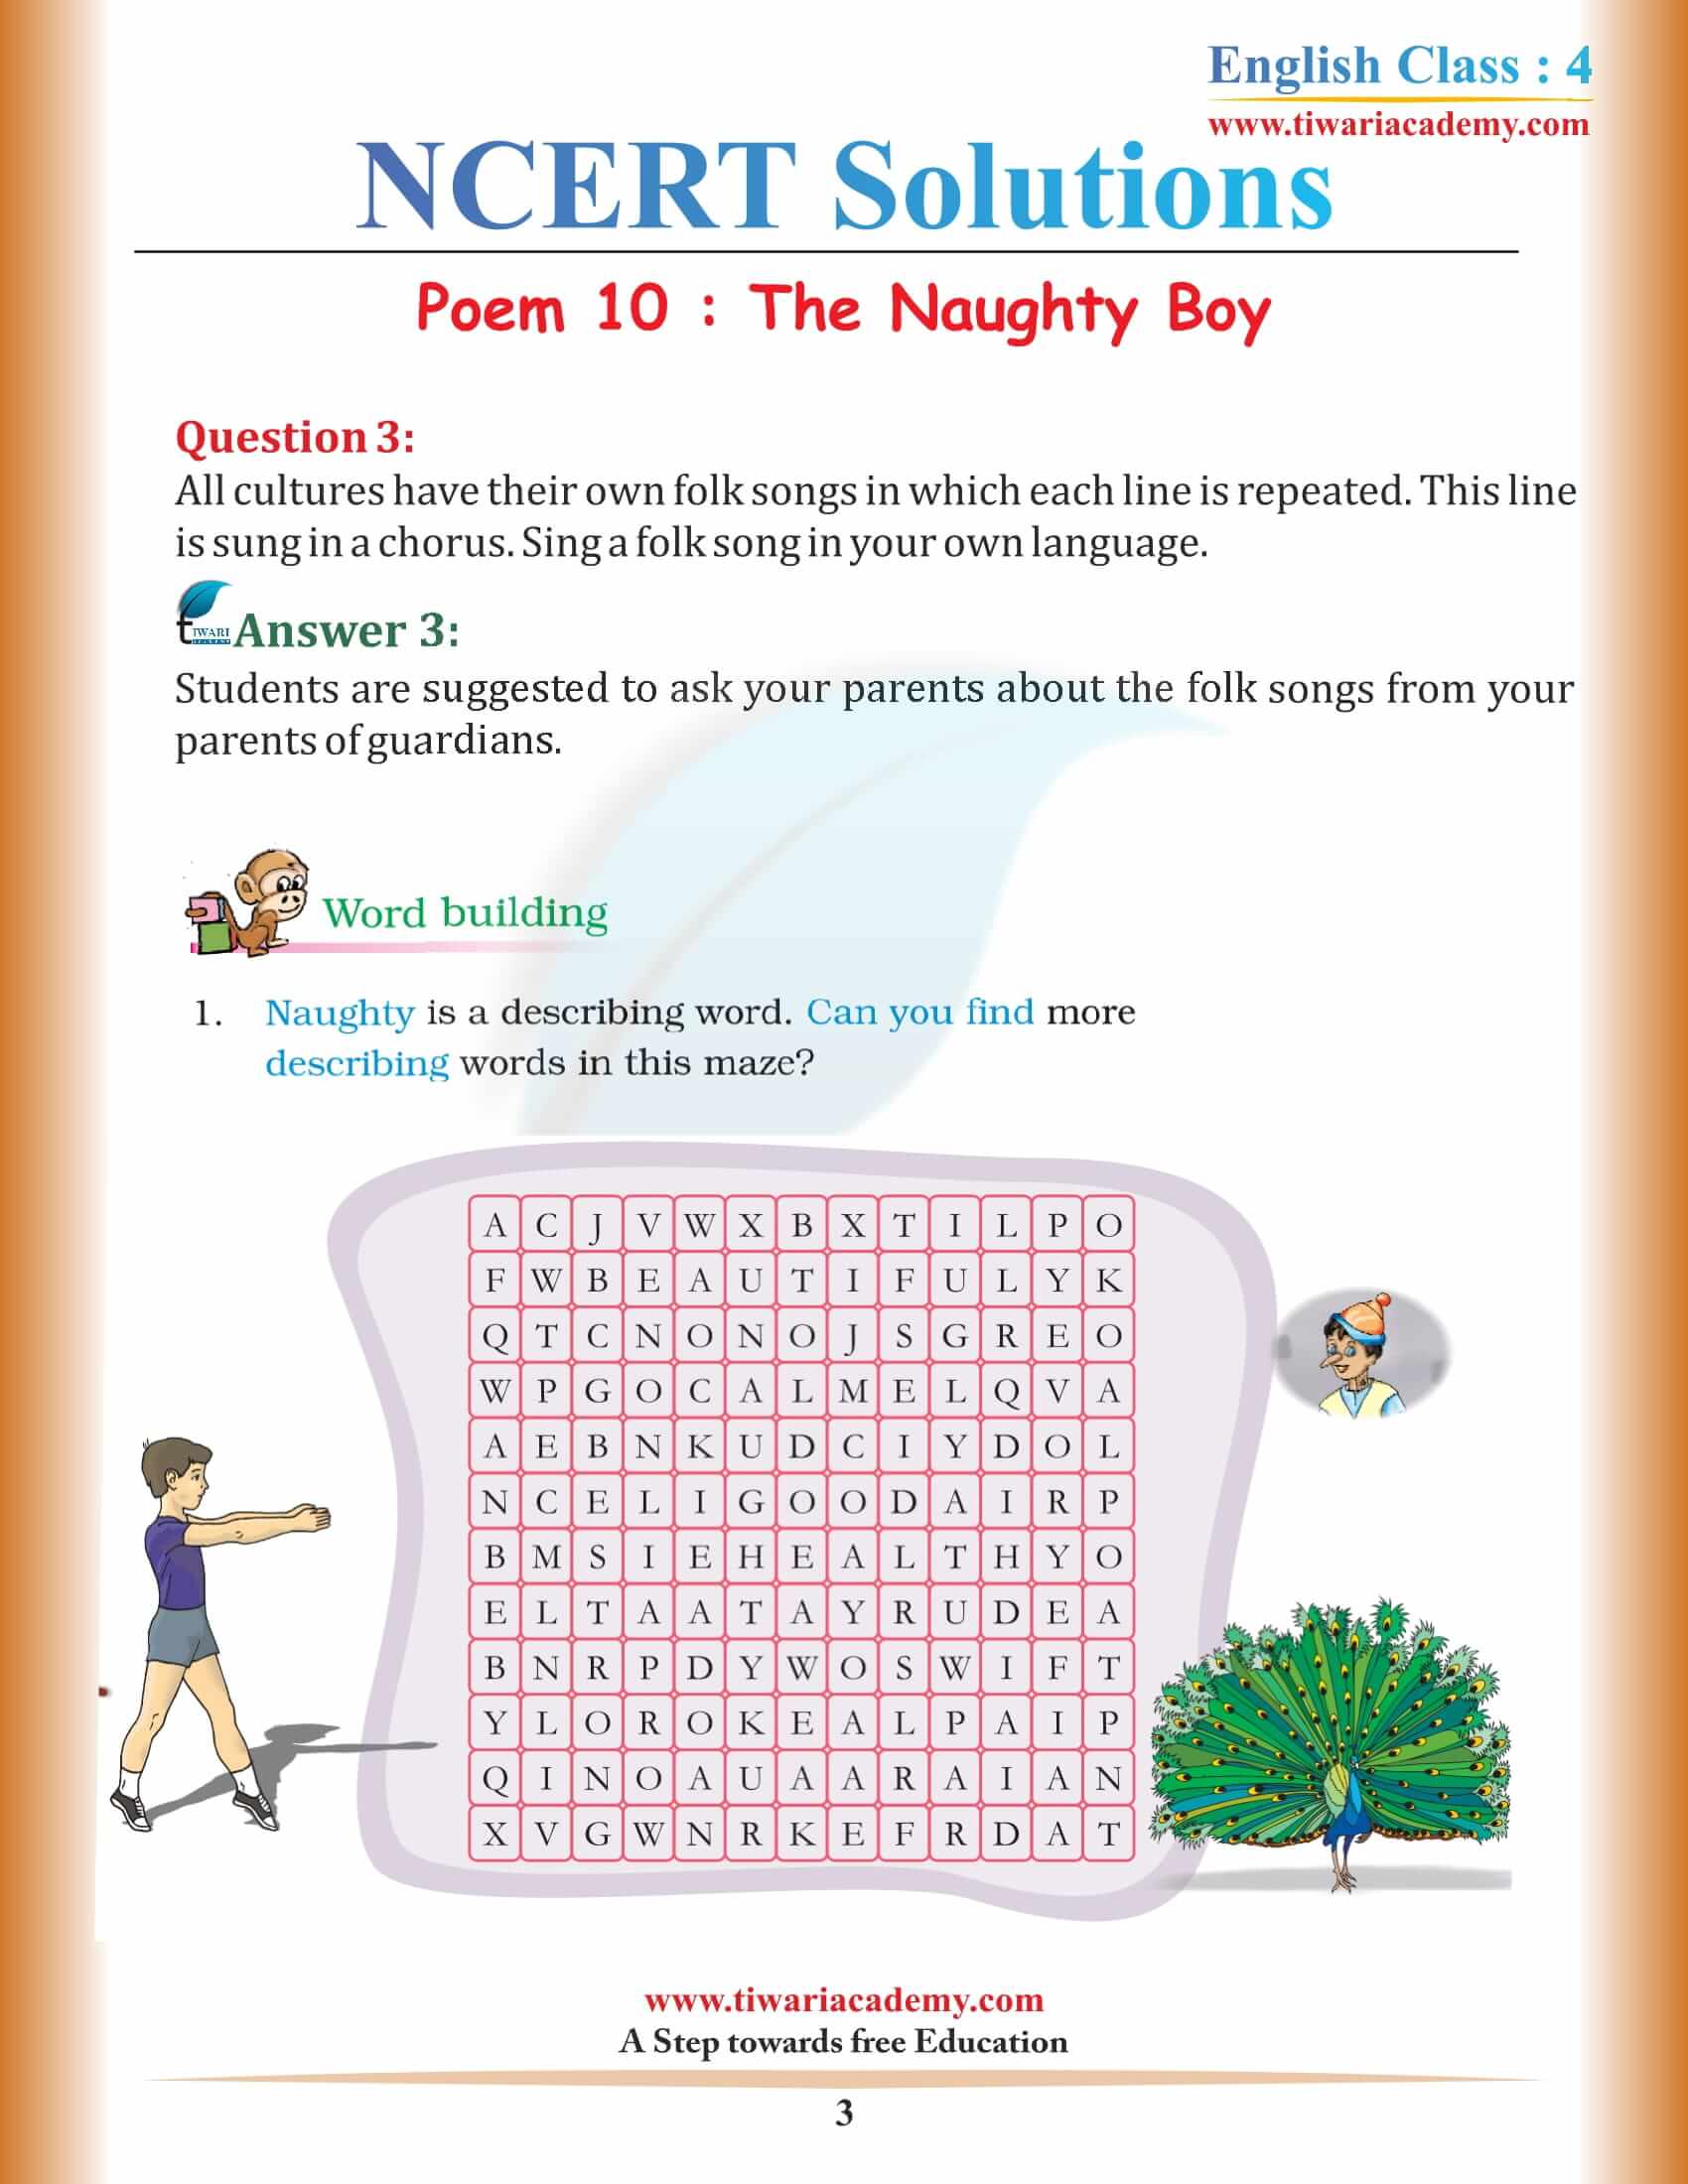 NCERT Solutions for Class 4 English Unit 10 answers